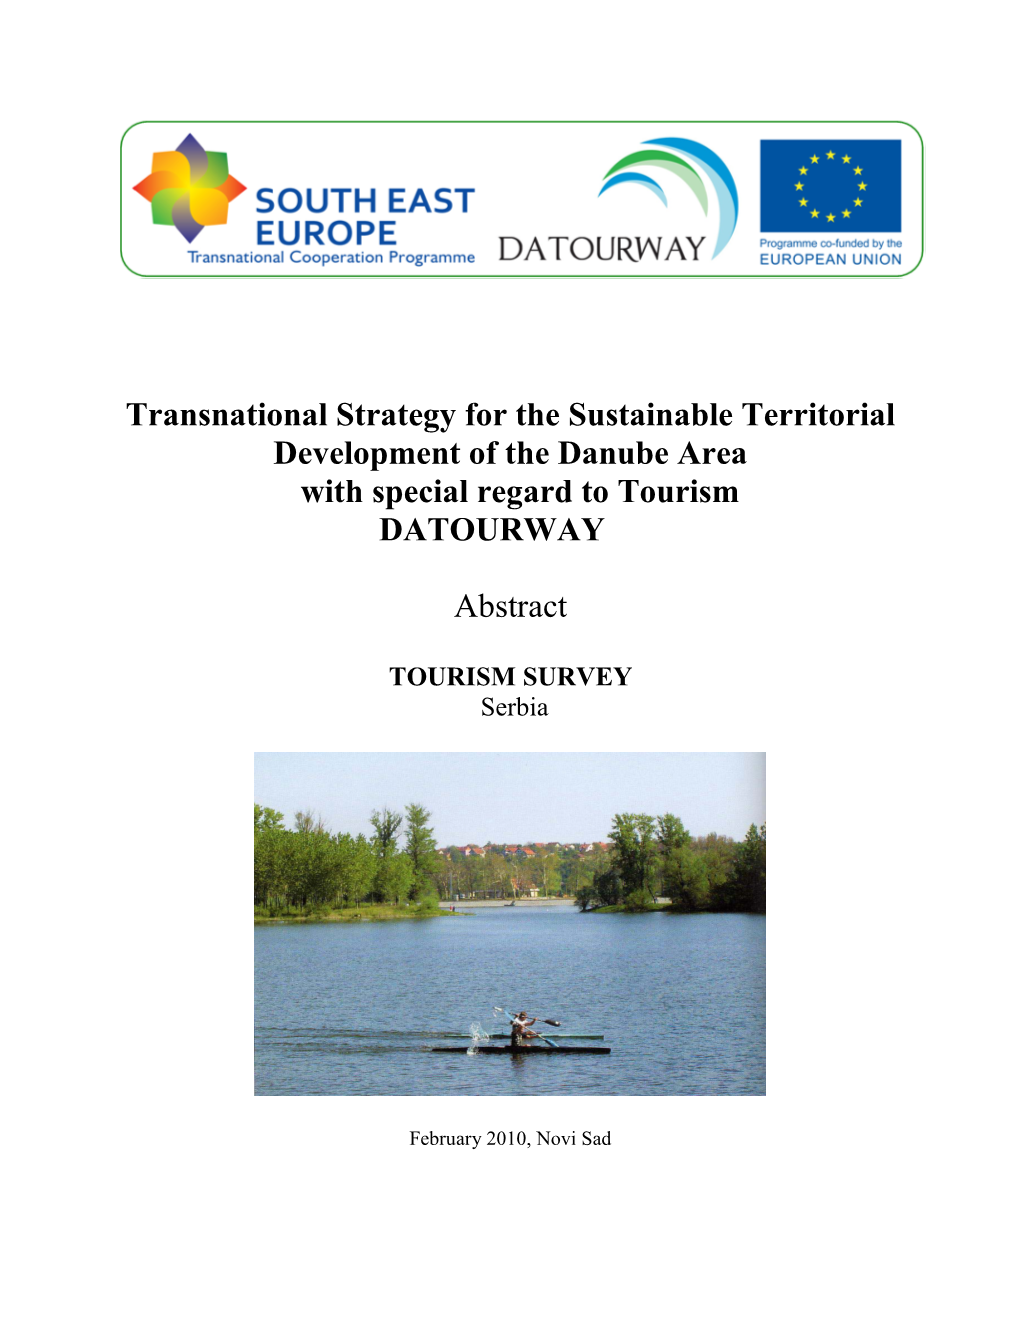 Transnational Strategy for the Sustainable Territorial Development of the Danube Area with Special Regard to Tourism DATOURWAY